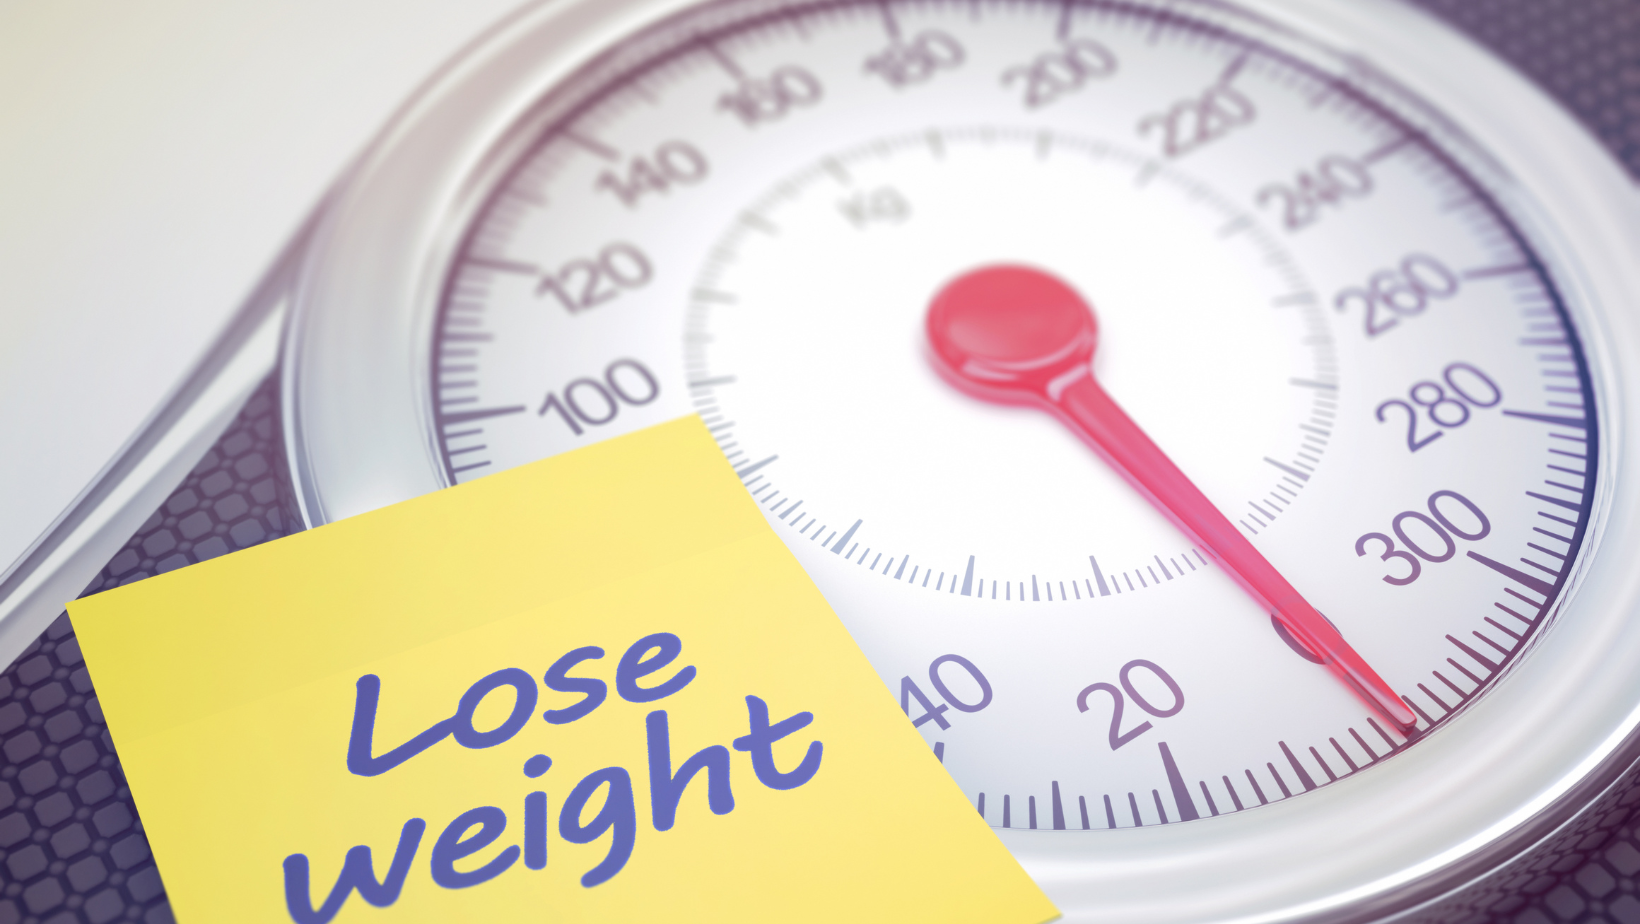 A note reading "lose WEight' sits on a scale. Are fad diets healthy? AHW explores that topic in this blog.